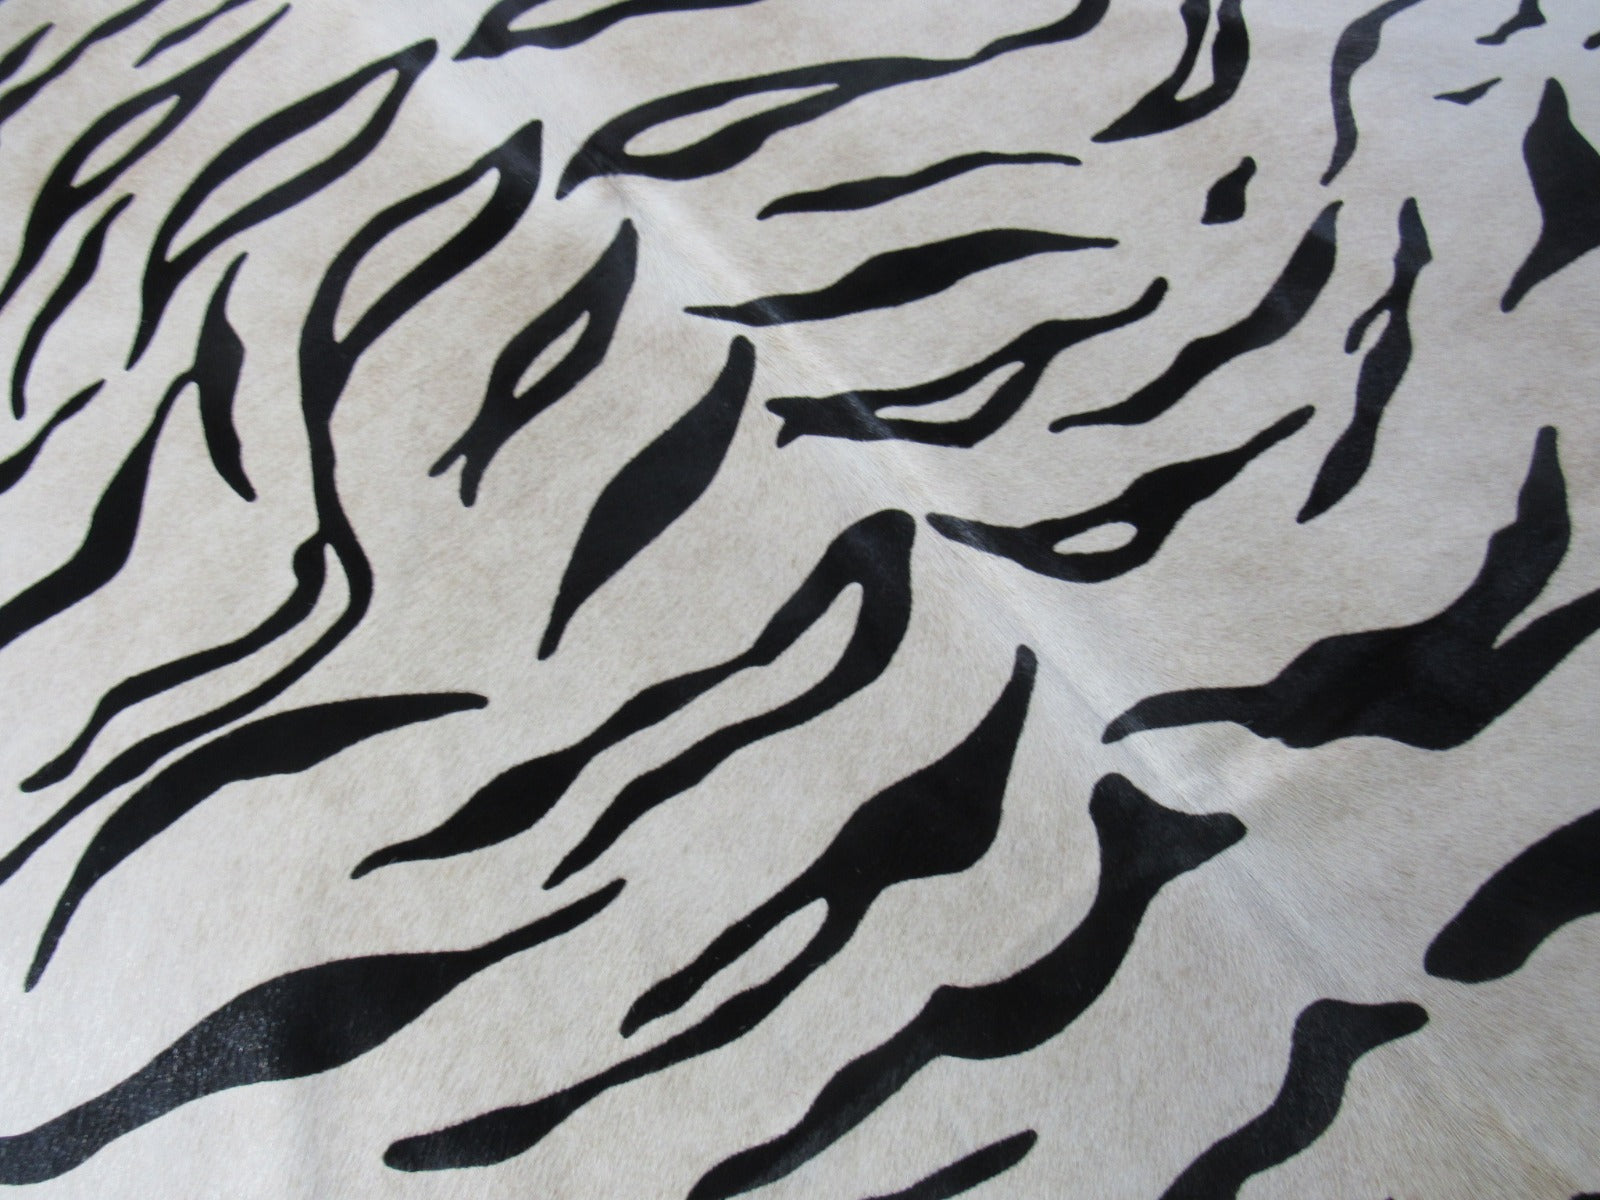 Tiger Print Cowhide Rug on Light Beige Background (fire brand) Size: 6.7x6.7 feet C-1684